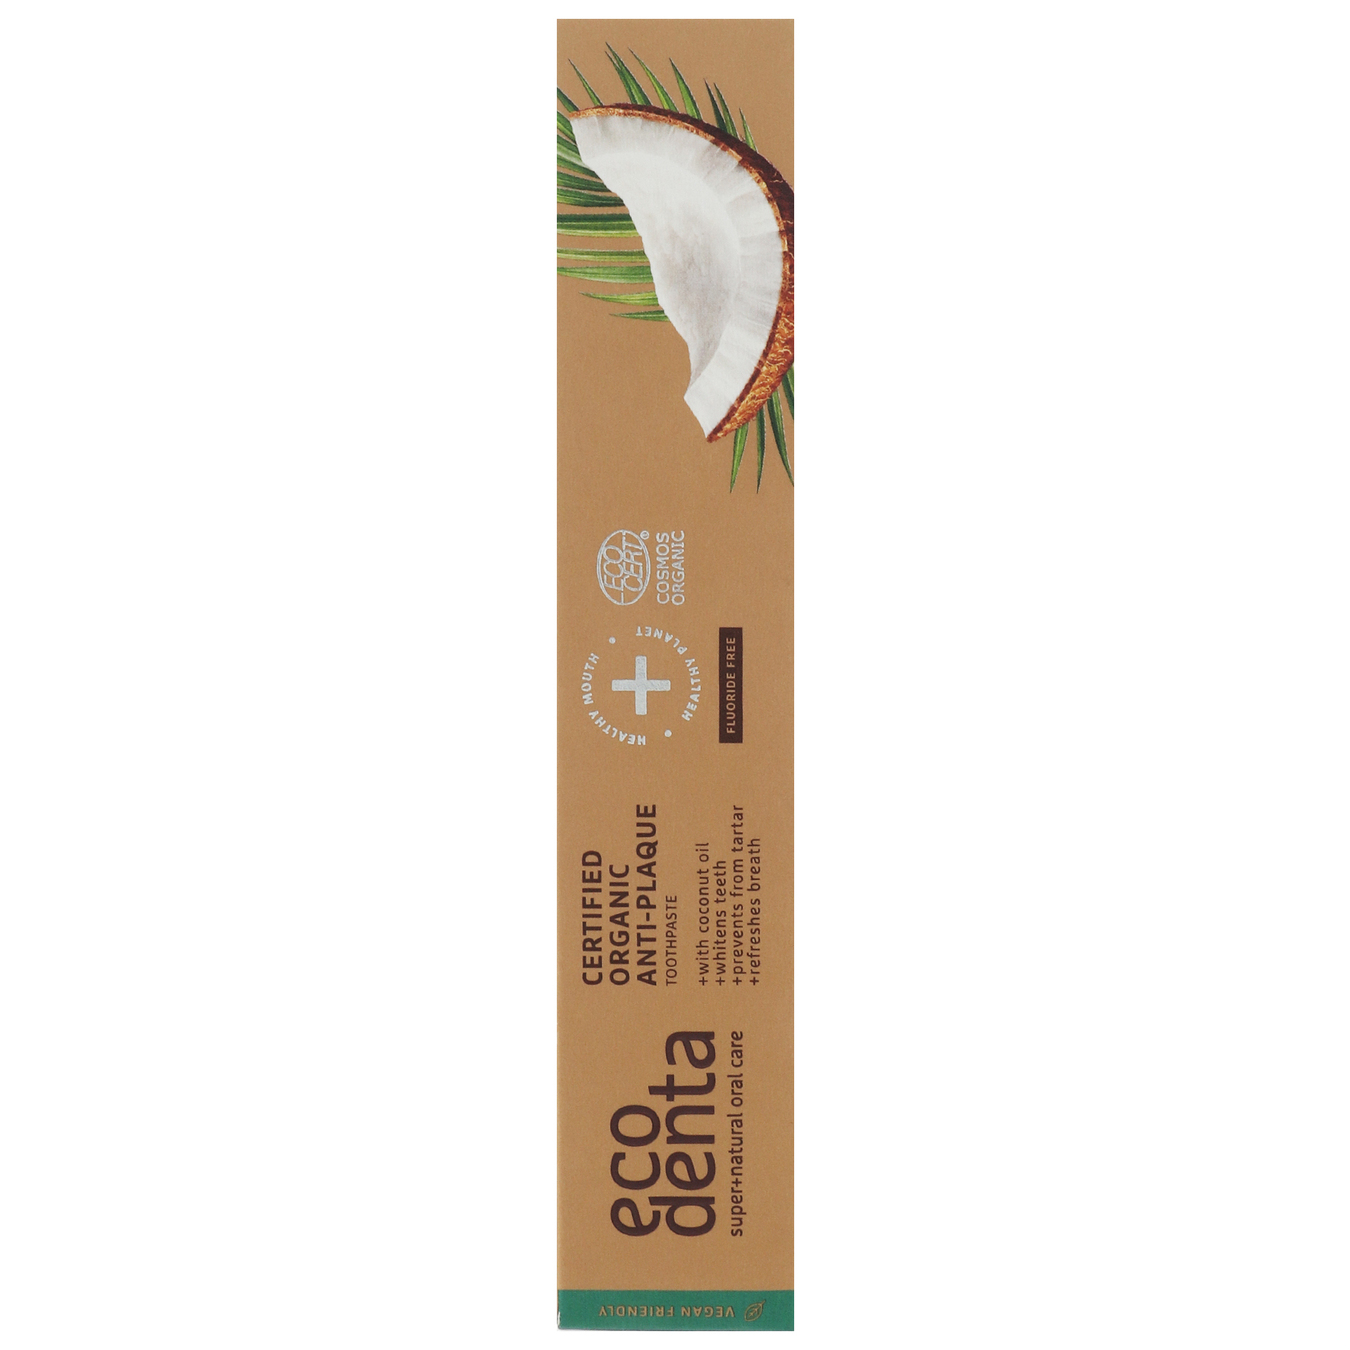 Toothpaste Ecodenta Organic Anti Plaque with Coconut Oil 75ml 2